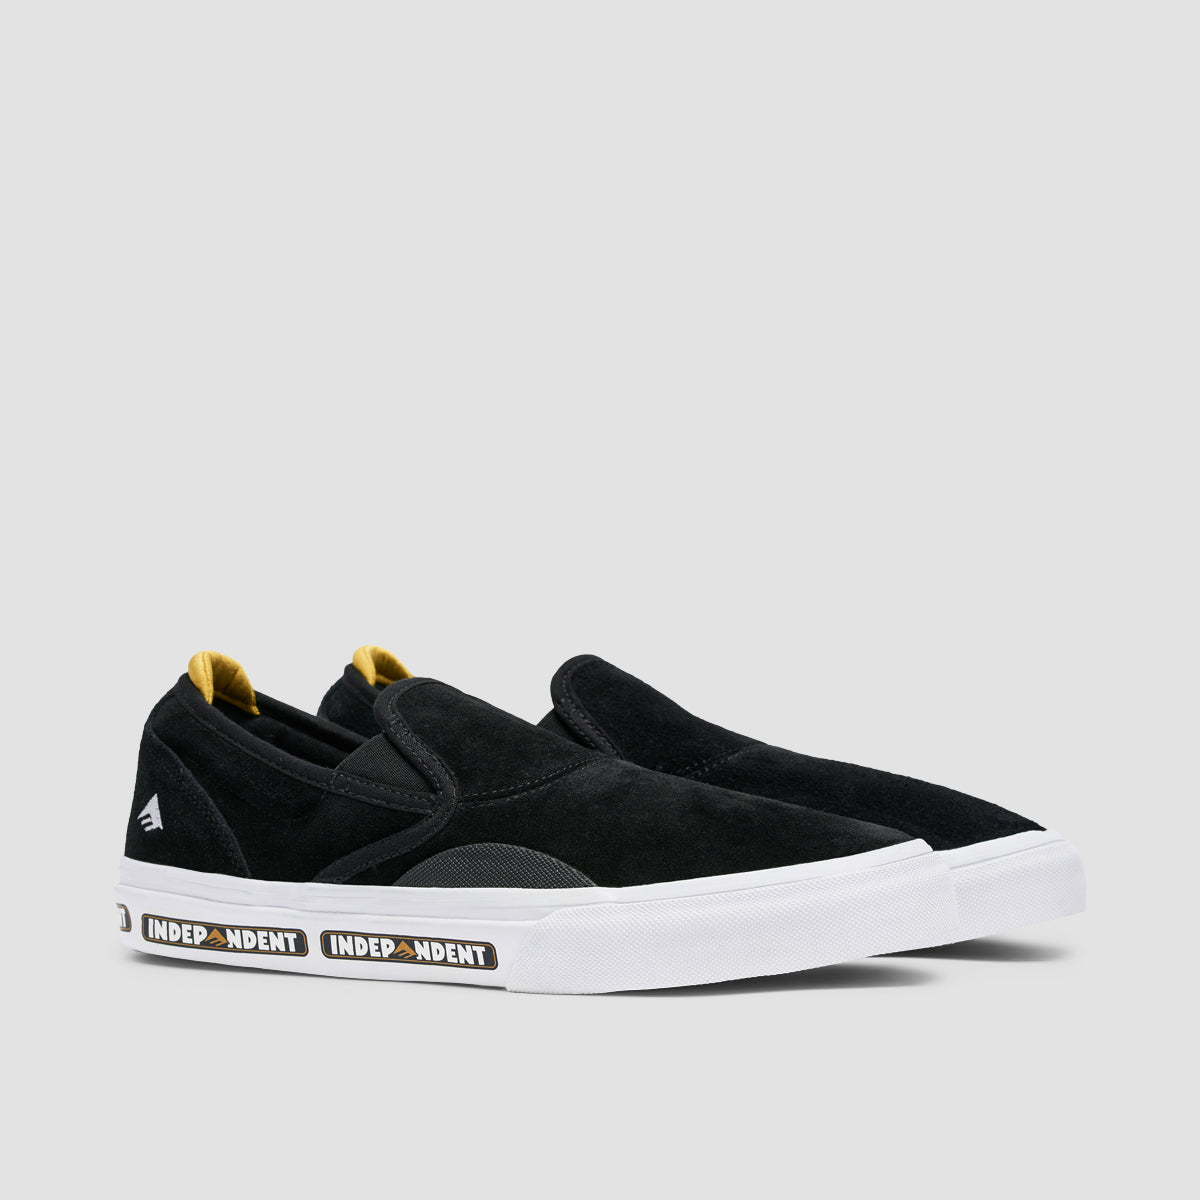 Emerica Wino G6 X Independent Slip On Shoes Black